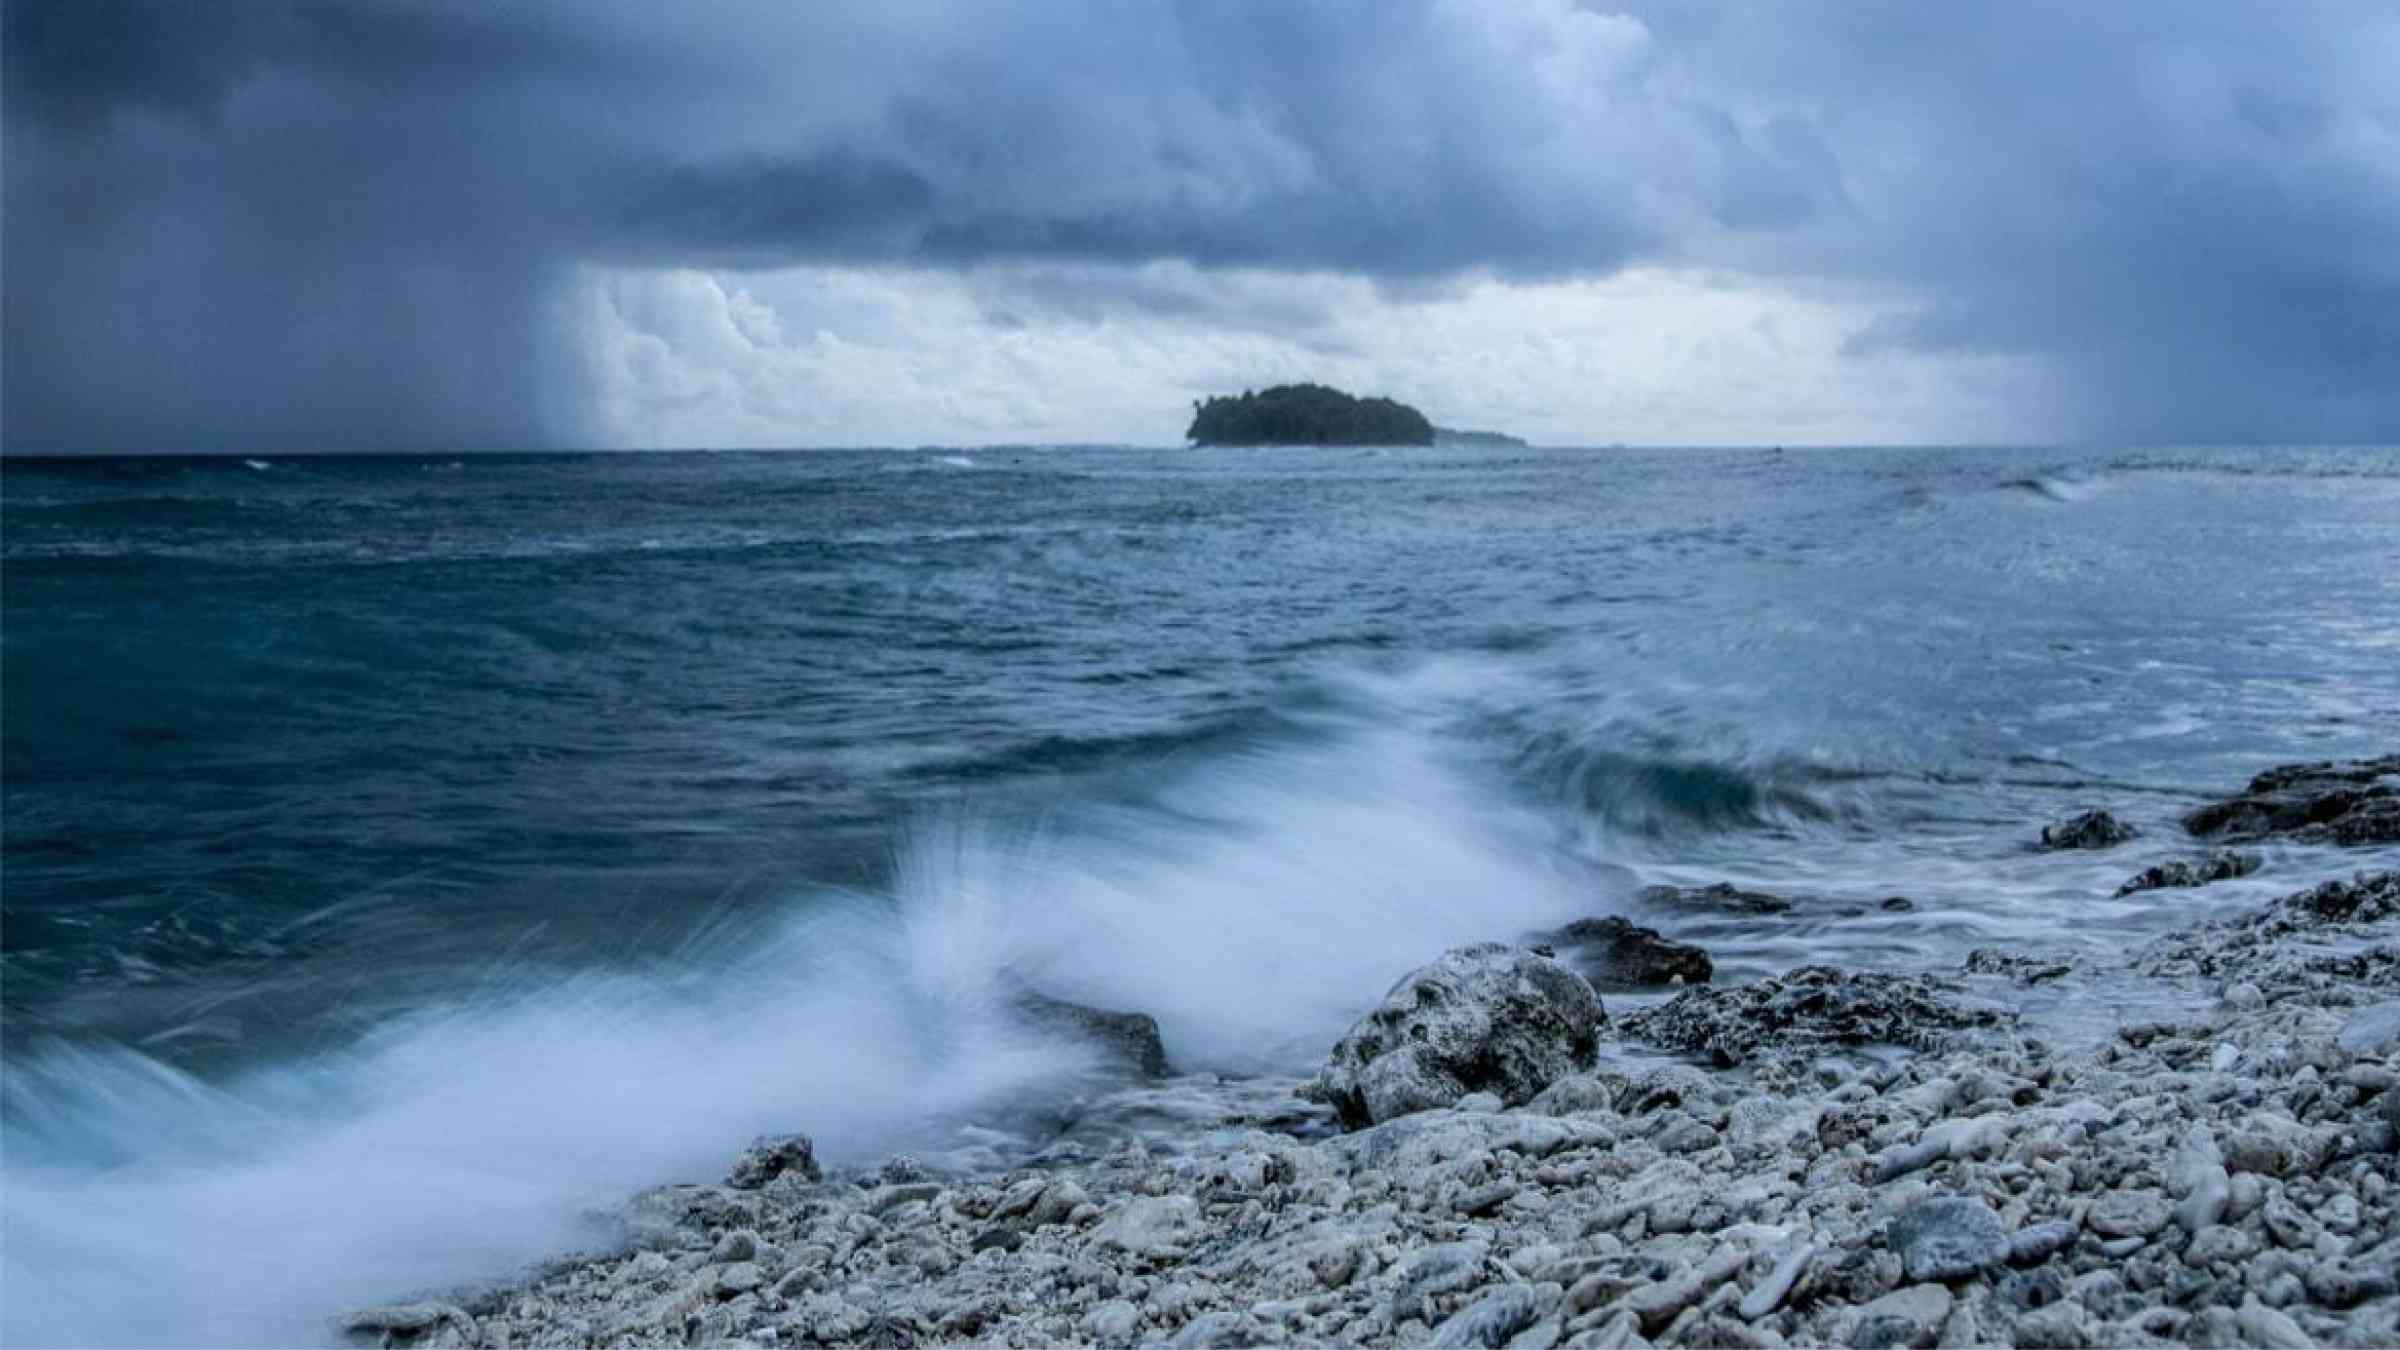 View from a beach in Palau as a storm approaches